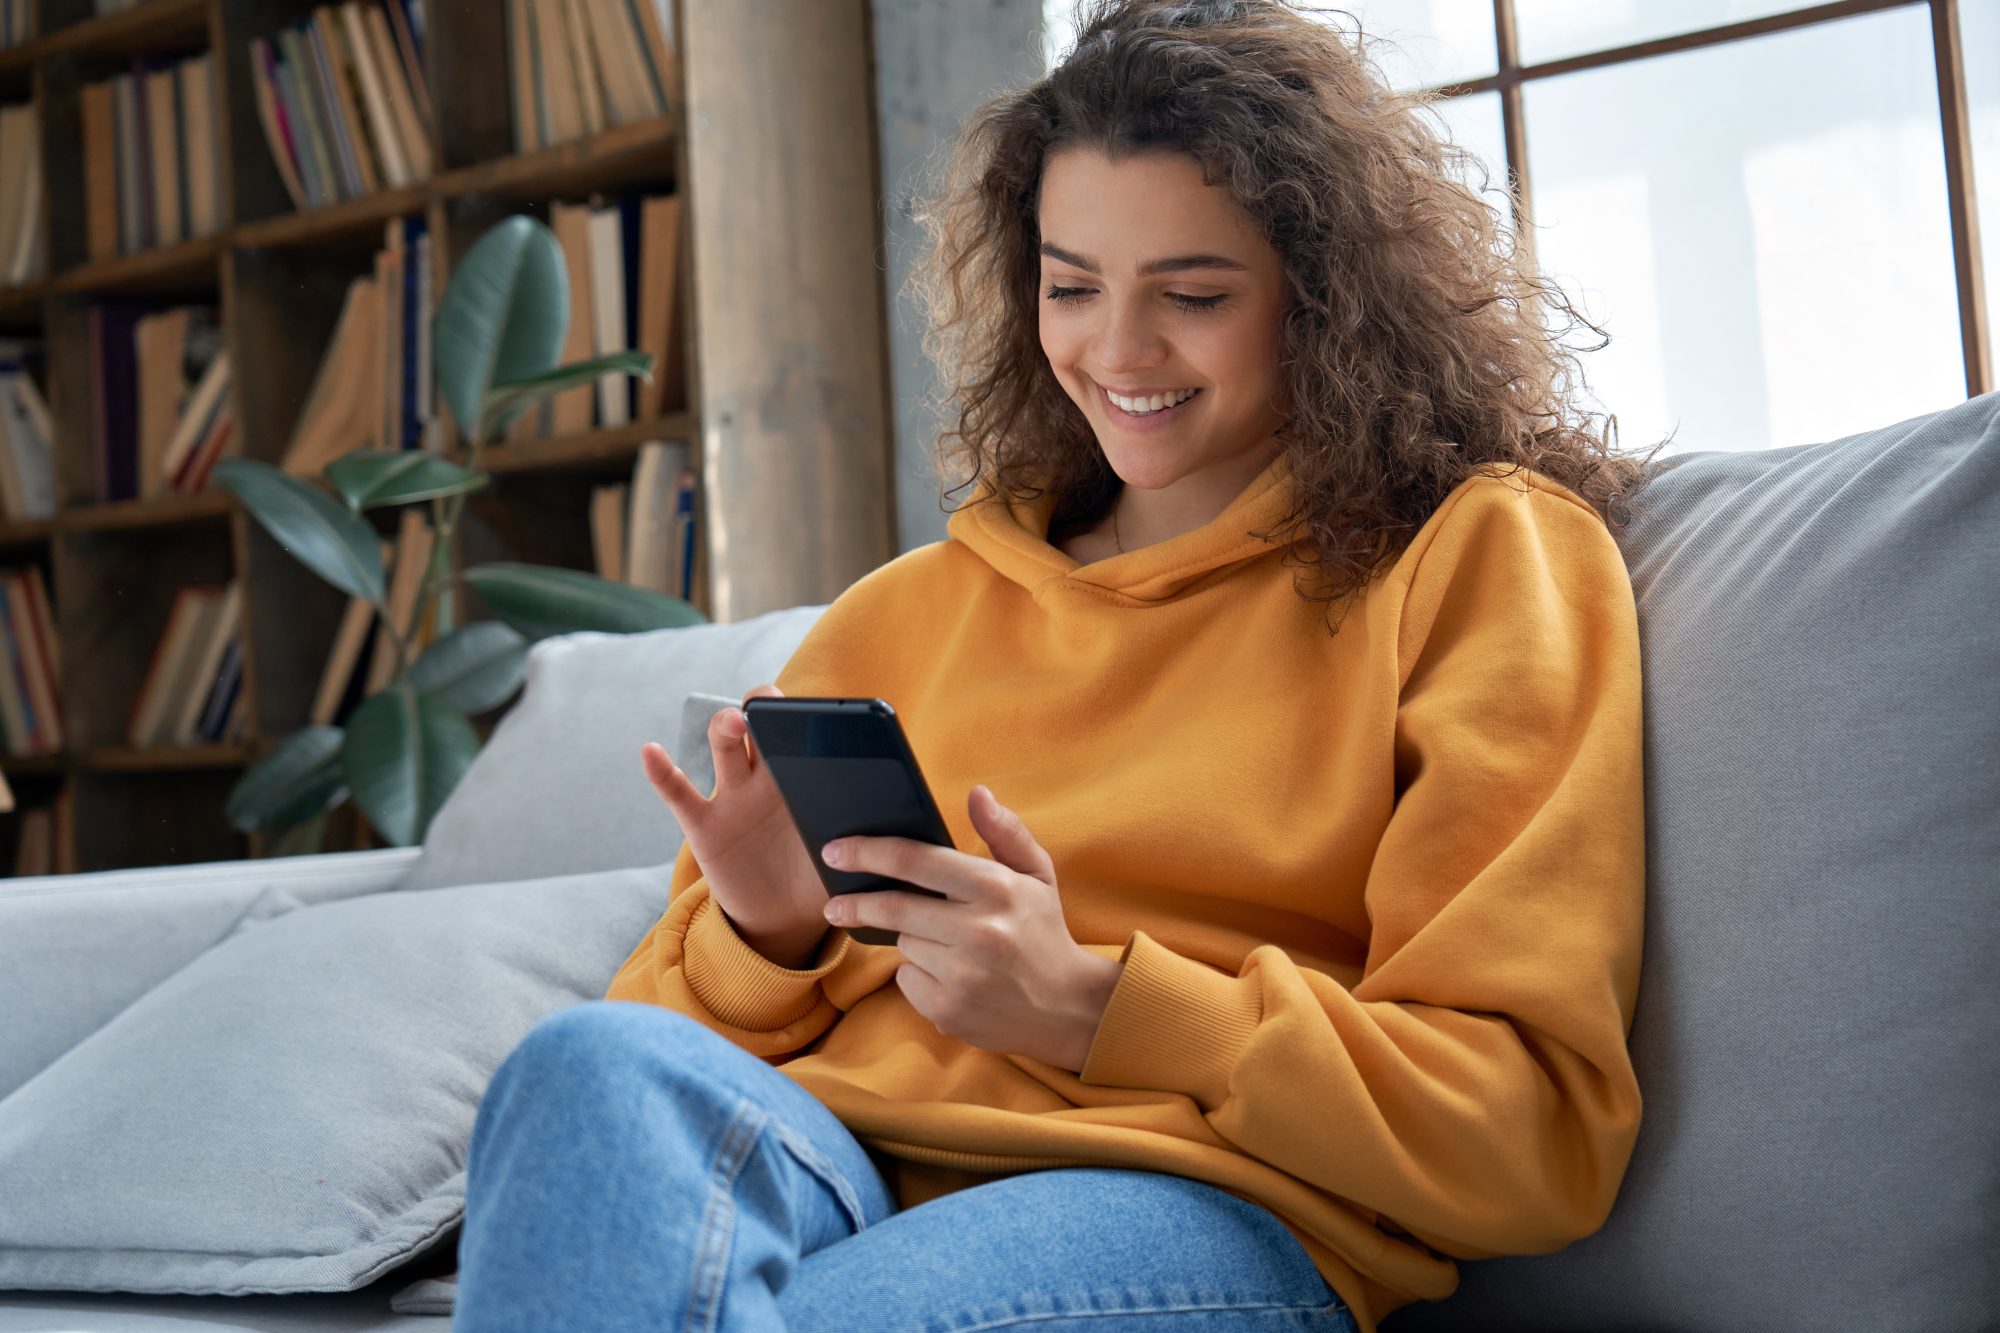 A female on the couch looking through her phone while smiling.